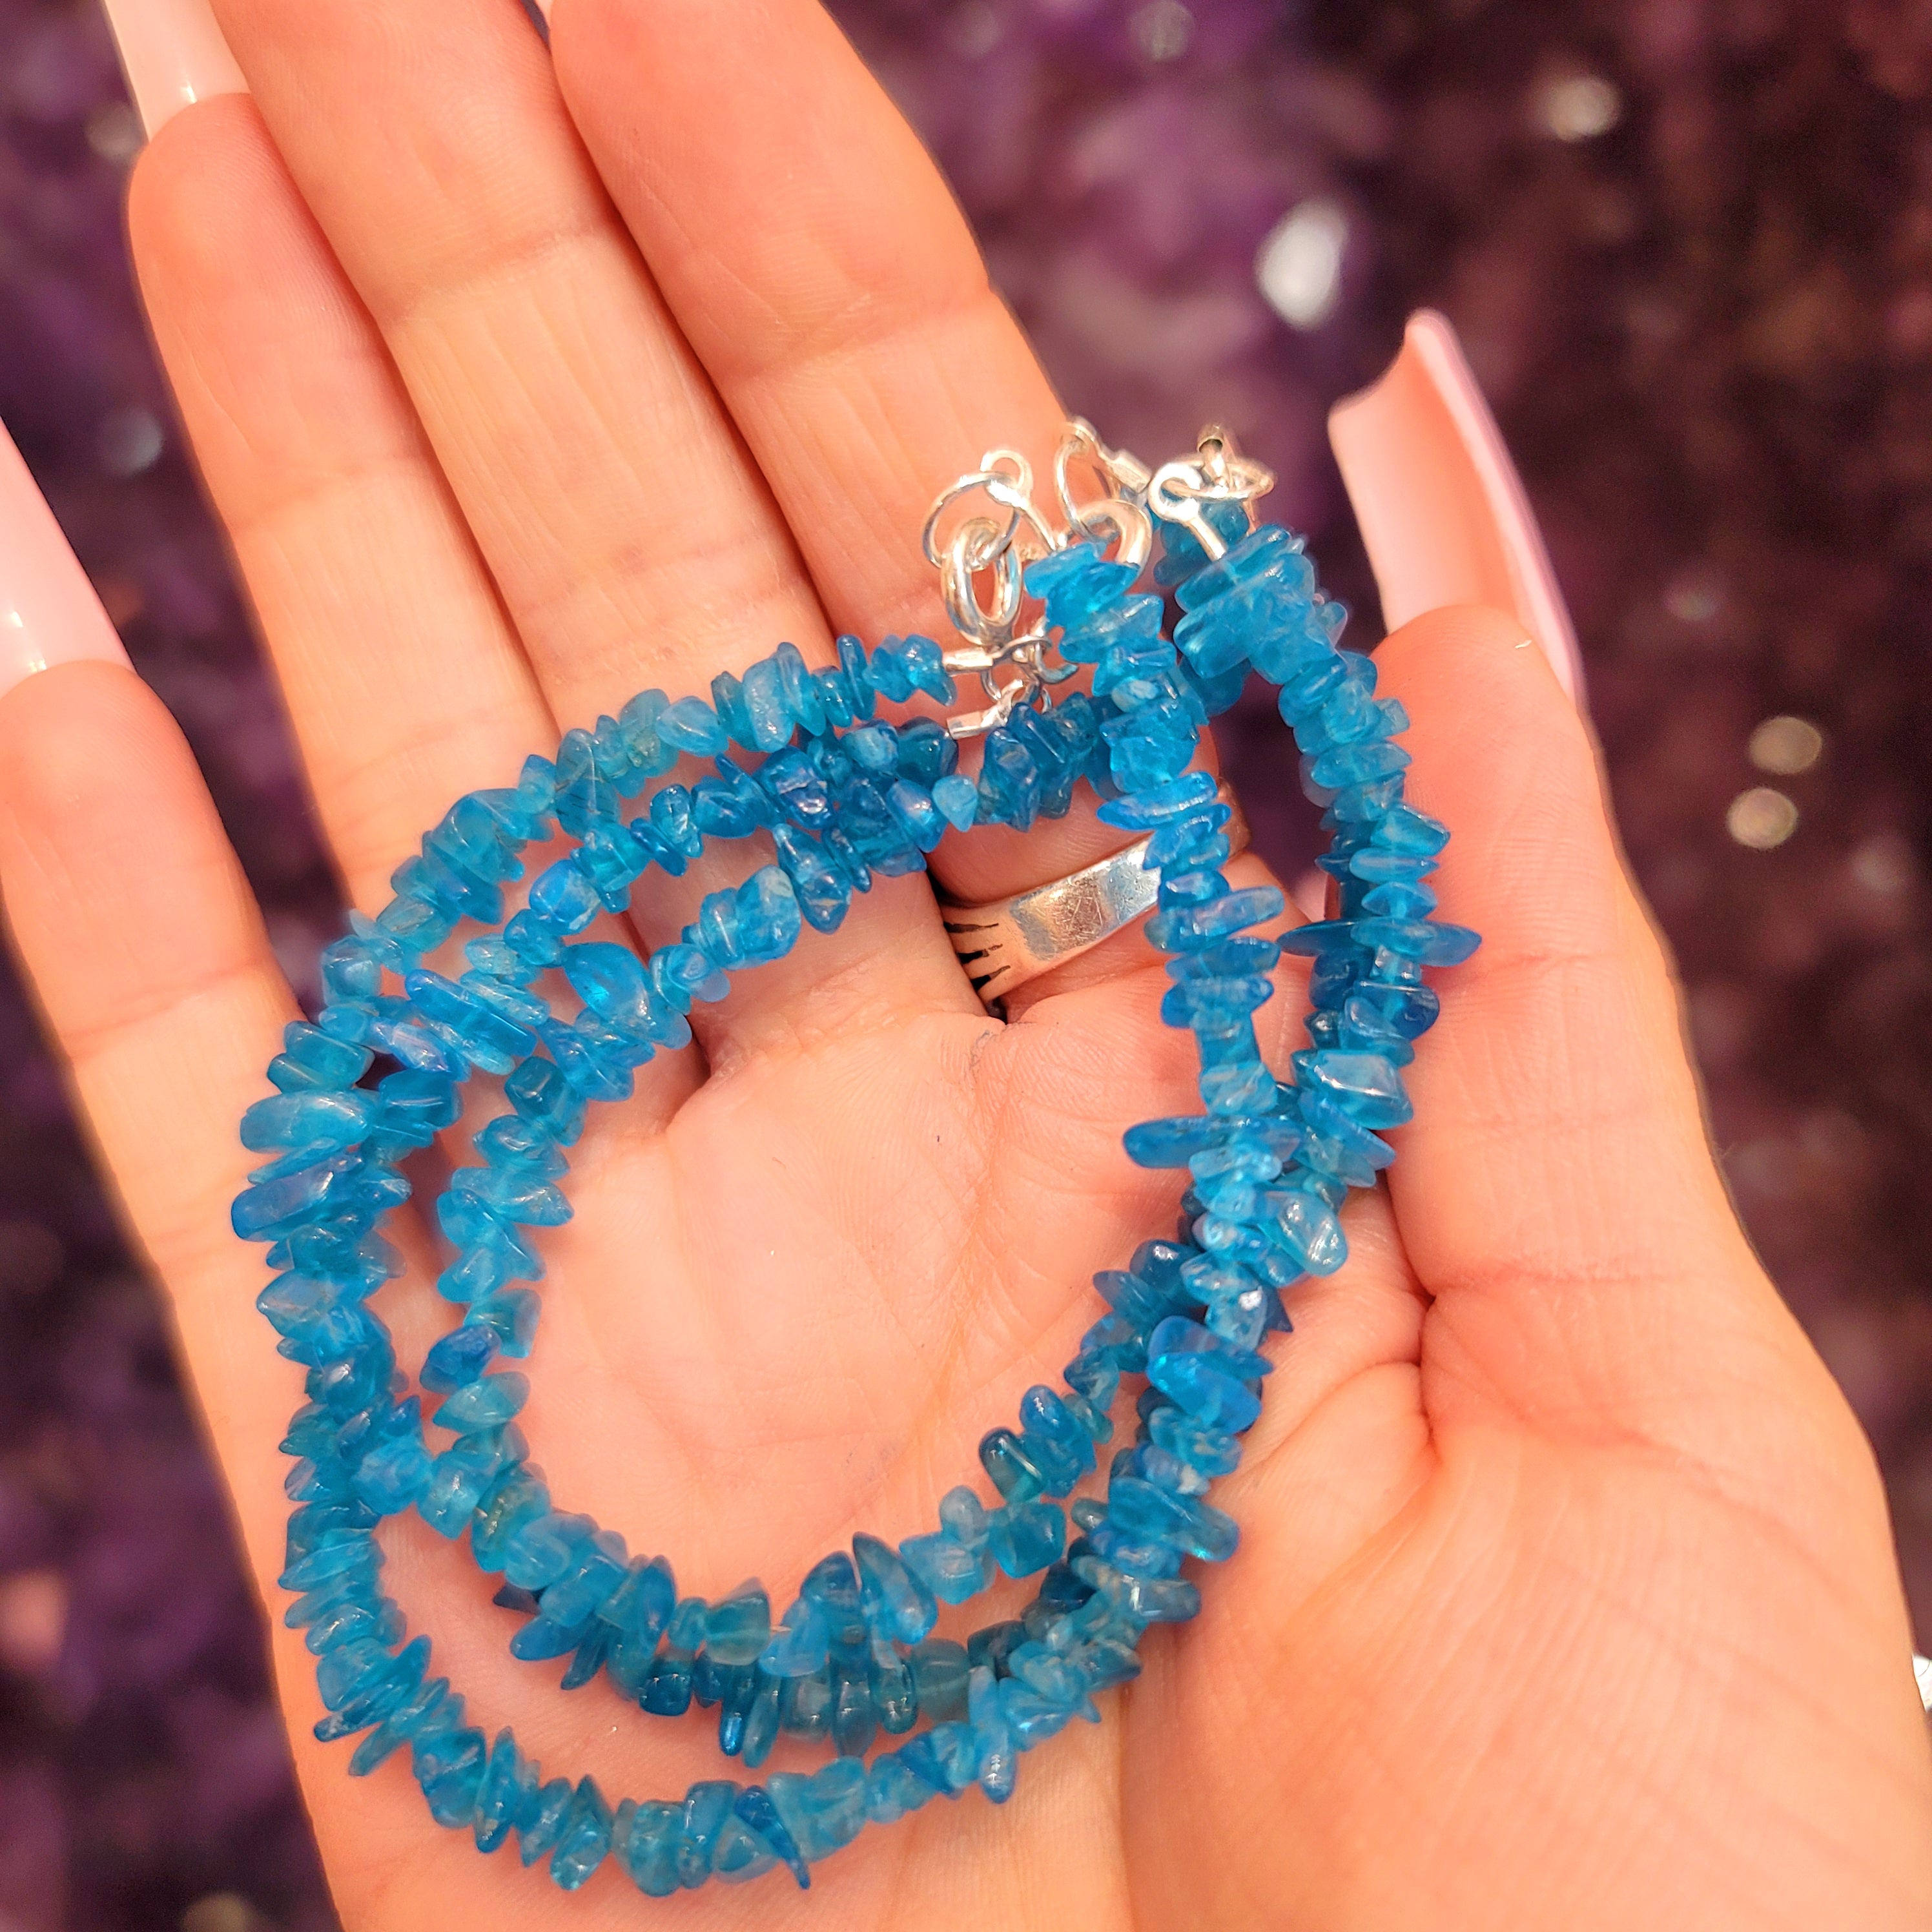 Blue Neon Apatite Chip Bracelet for Connection, Healthy Weight Loss and Overall Wellness